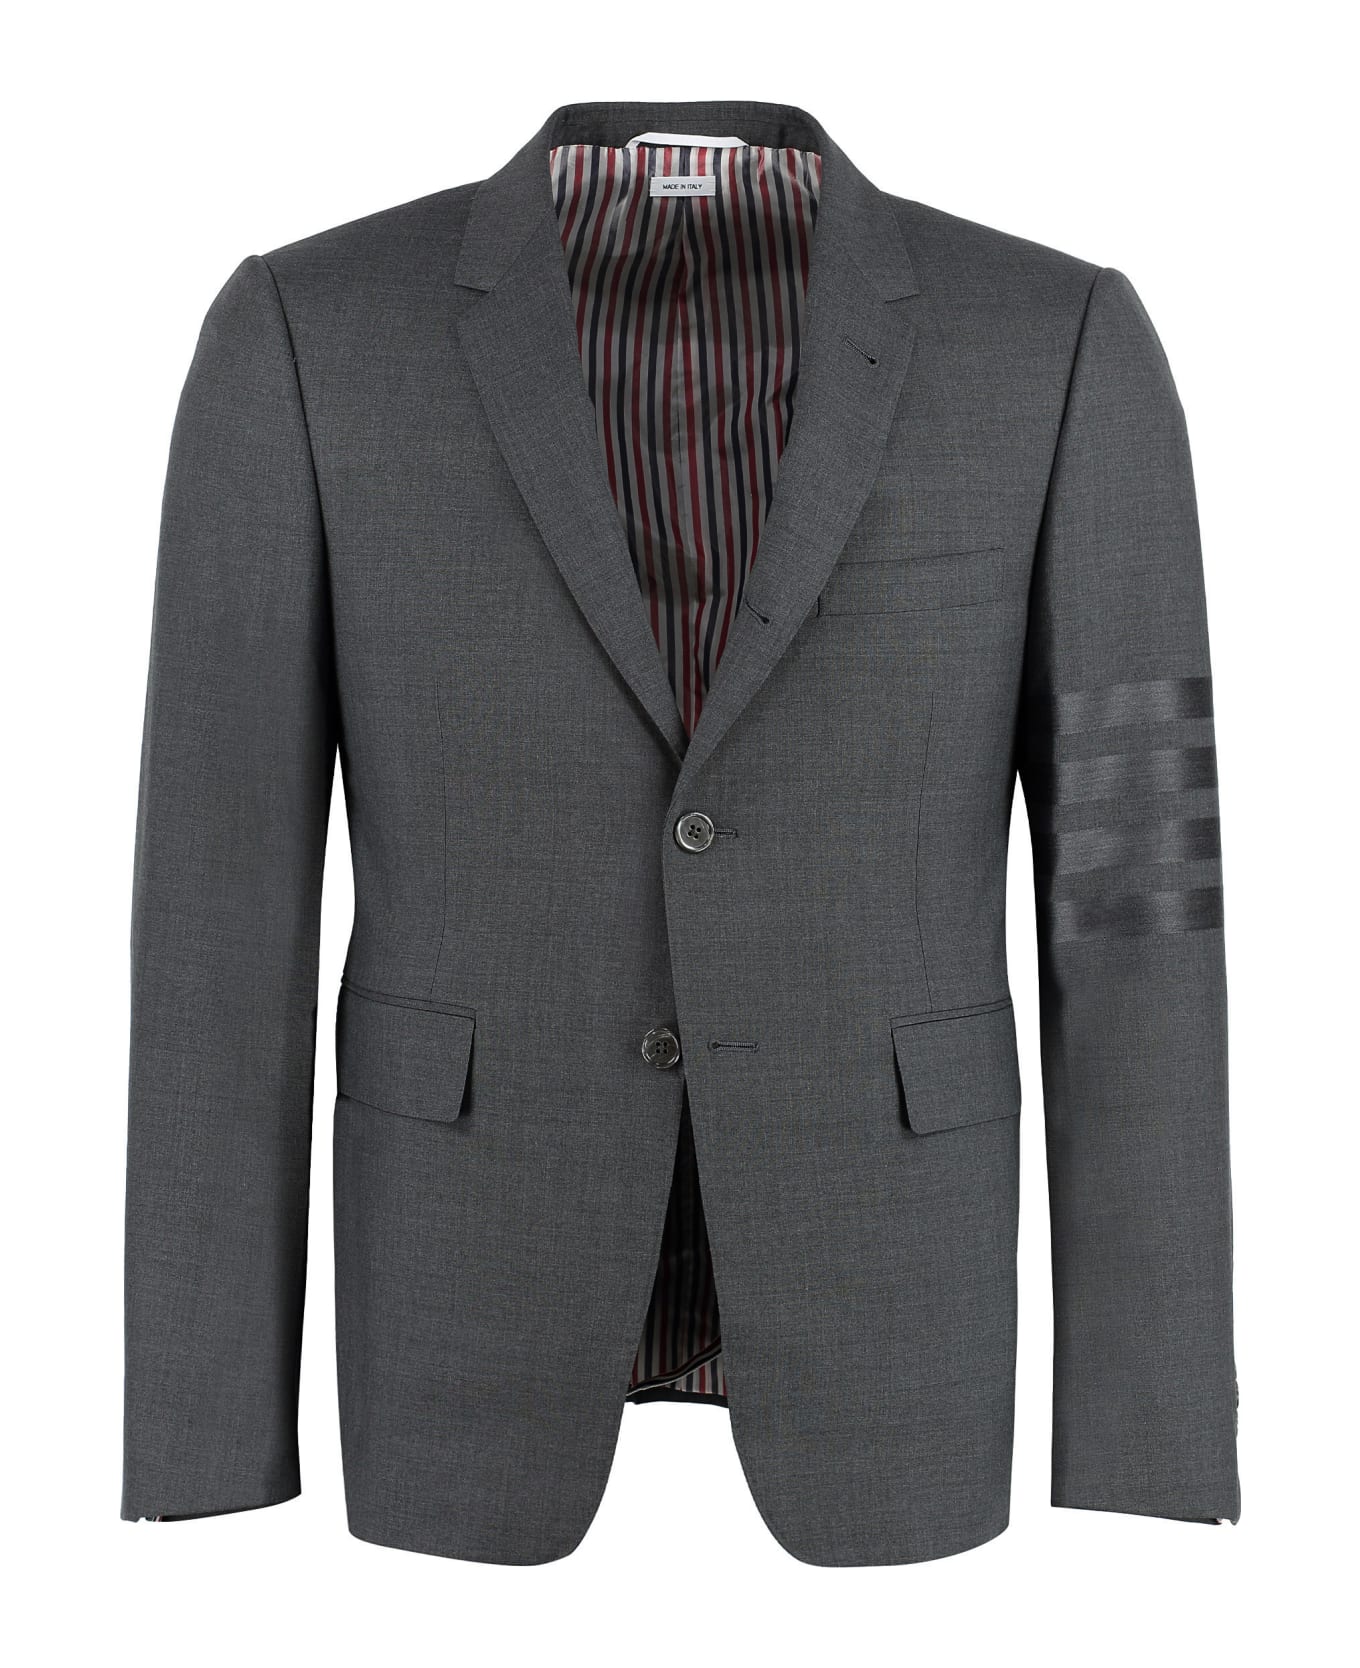 Thom Browne Single-breasted Two-button Jacket - grey